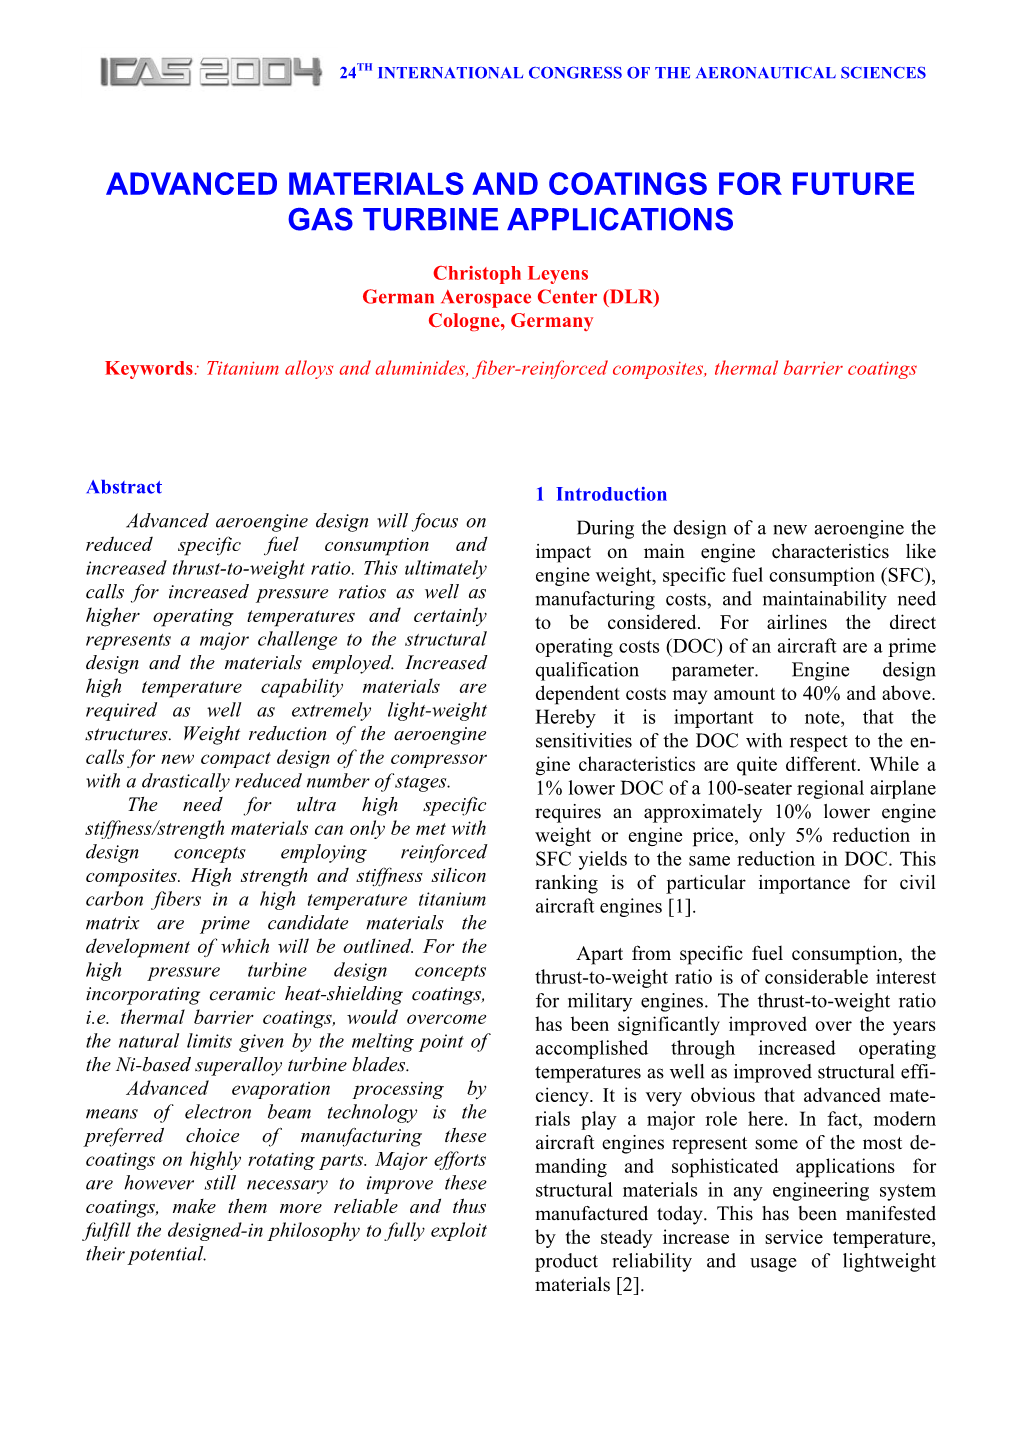 Advanced Materials and Coatings for Future Gas Turbine Applications